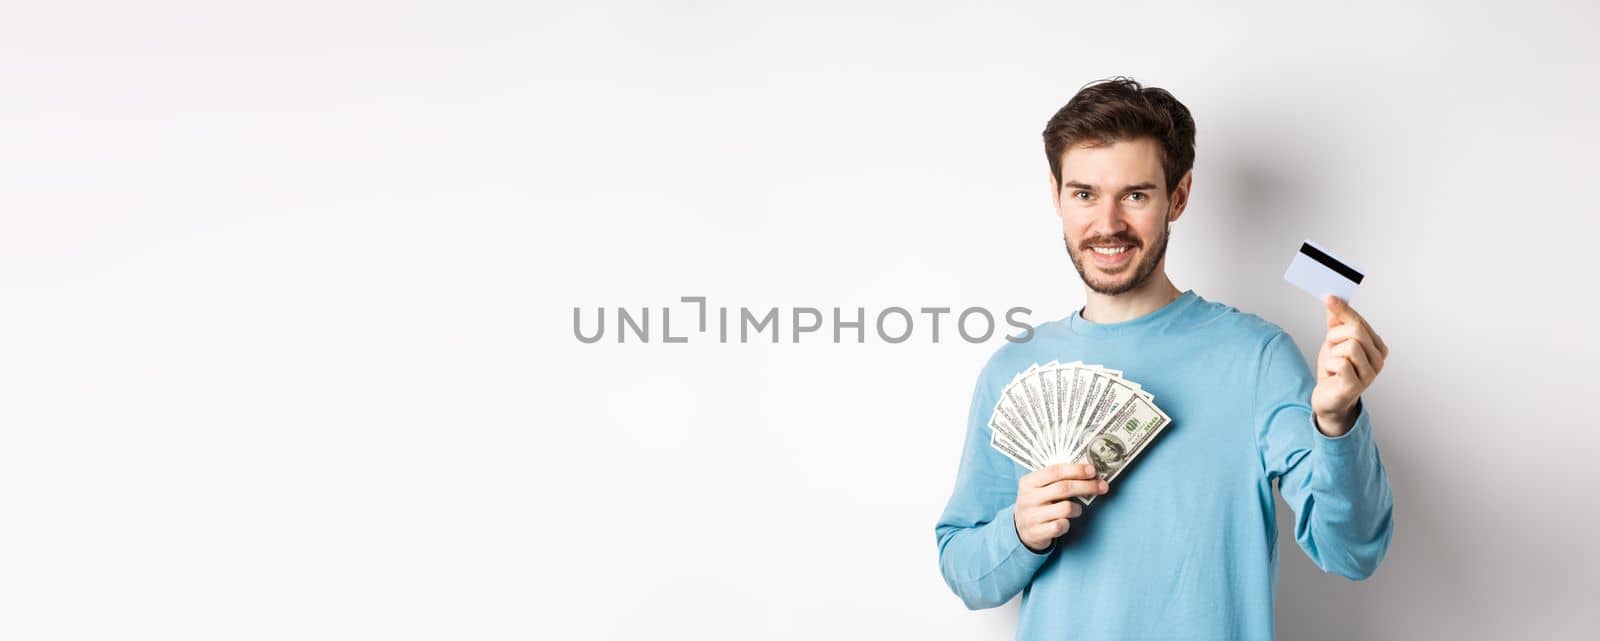 Handsome young man smiling and offering payment in cash and contactless, showing money with plastic credit card, standing on white background.